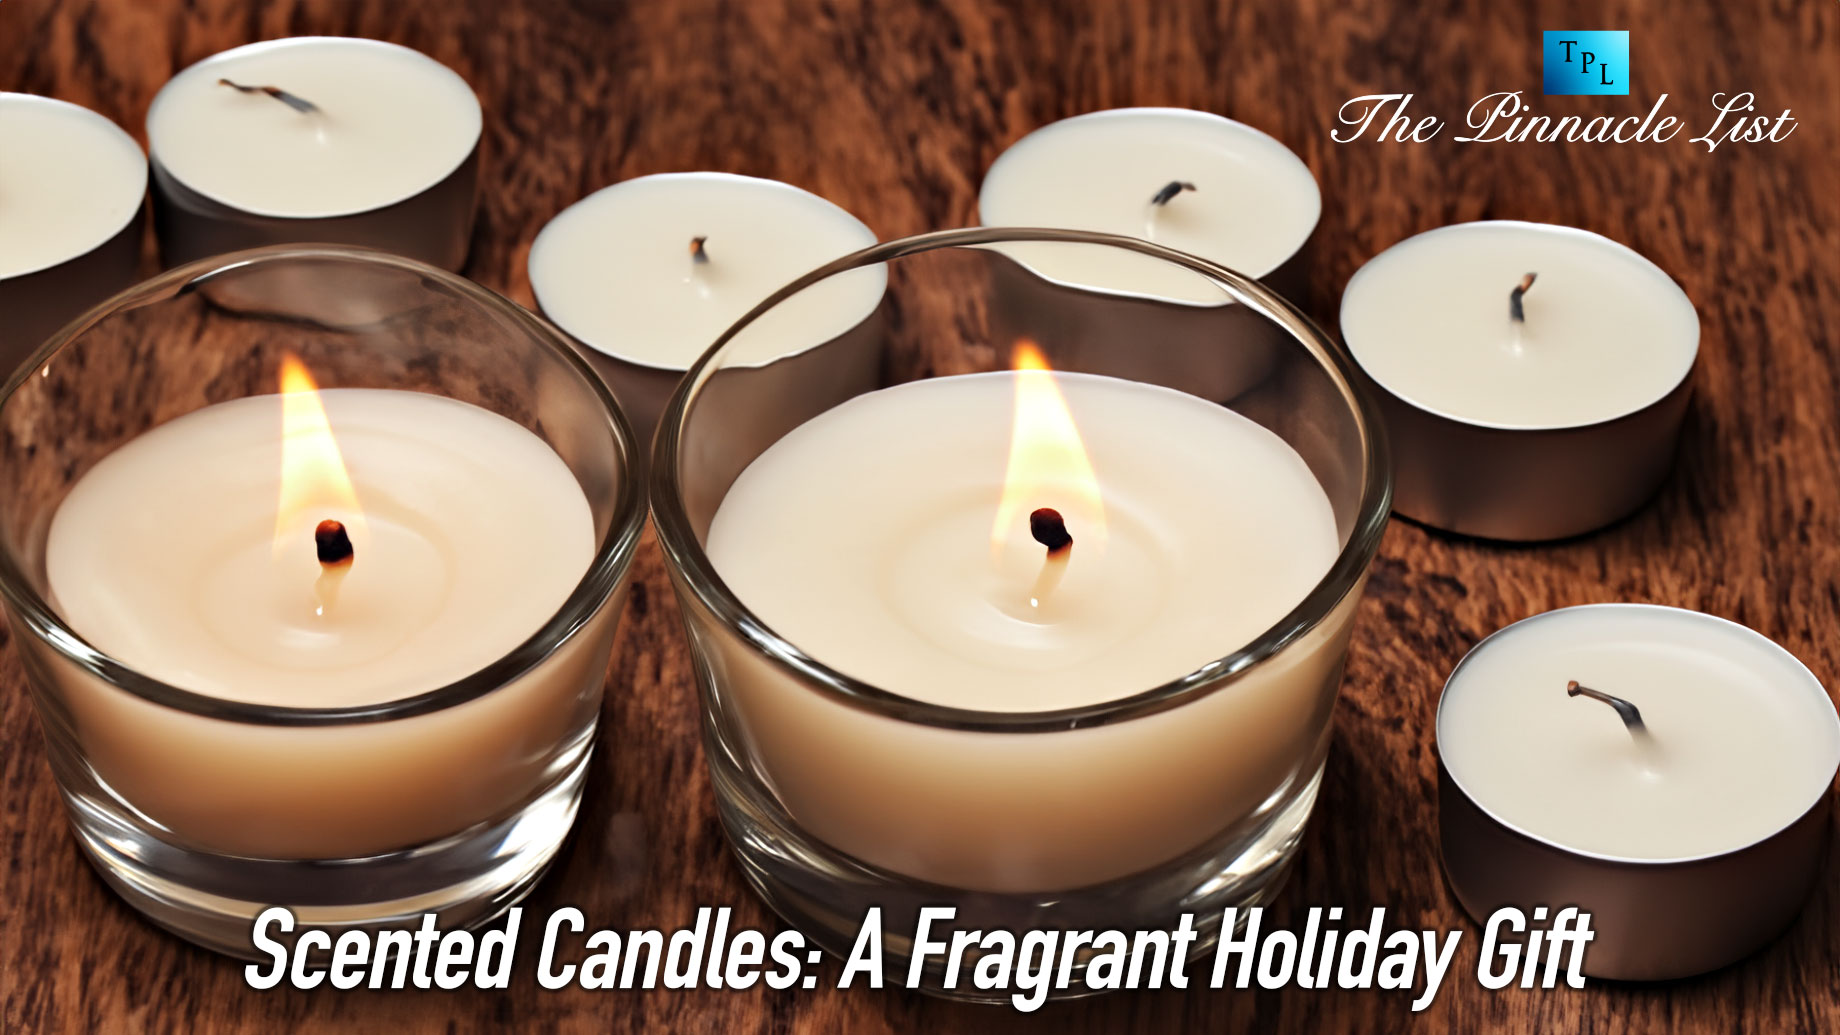 Scented Candles: A Fragrant Holiday Gift